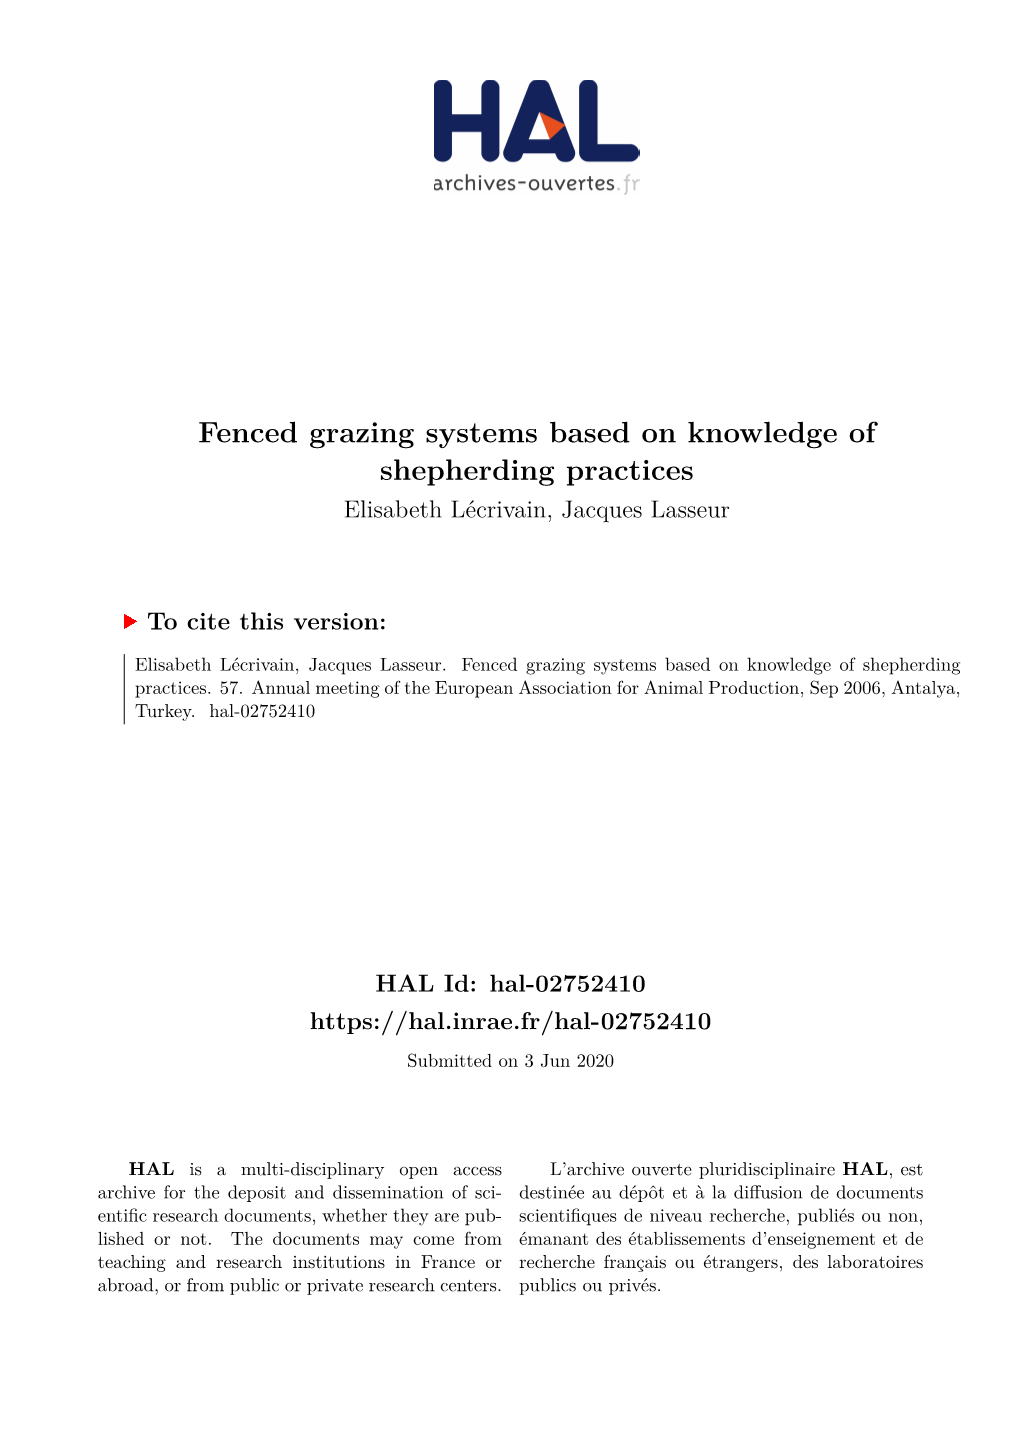 Fenced Grazing Systems Based on Knowledge of Shepherding Practices Elisabeth Lécrivain, Jacques Lasseur